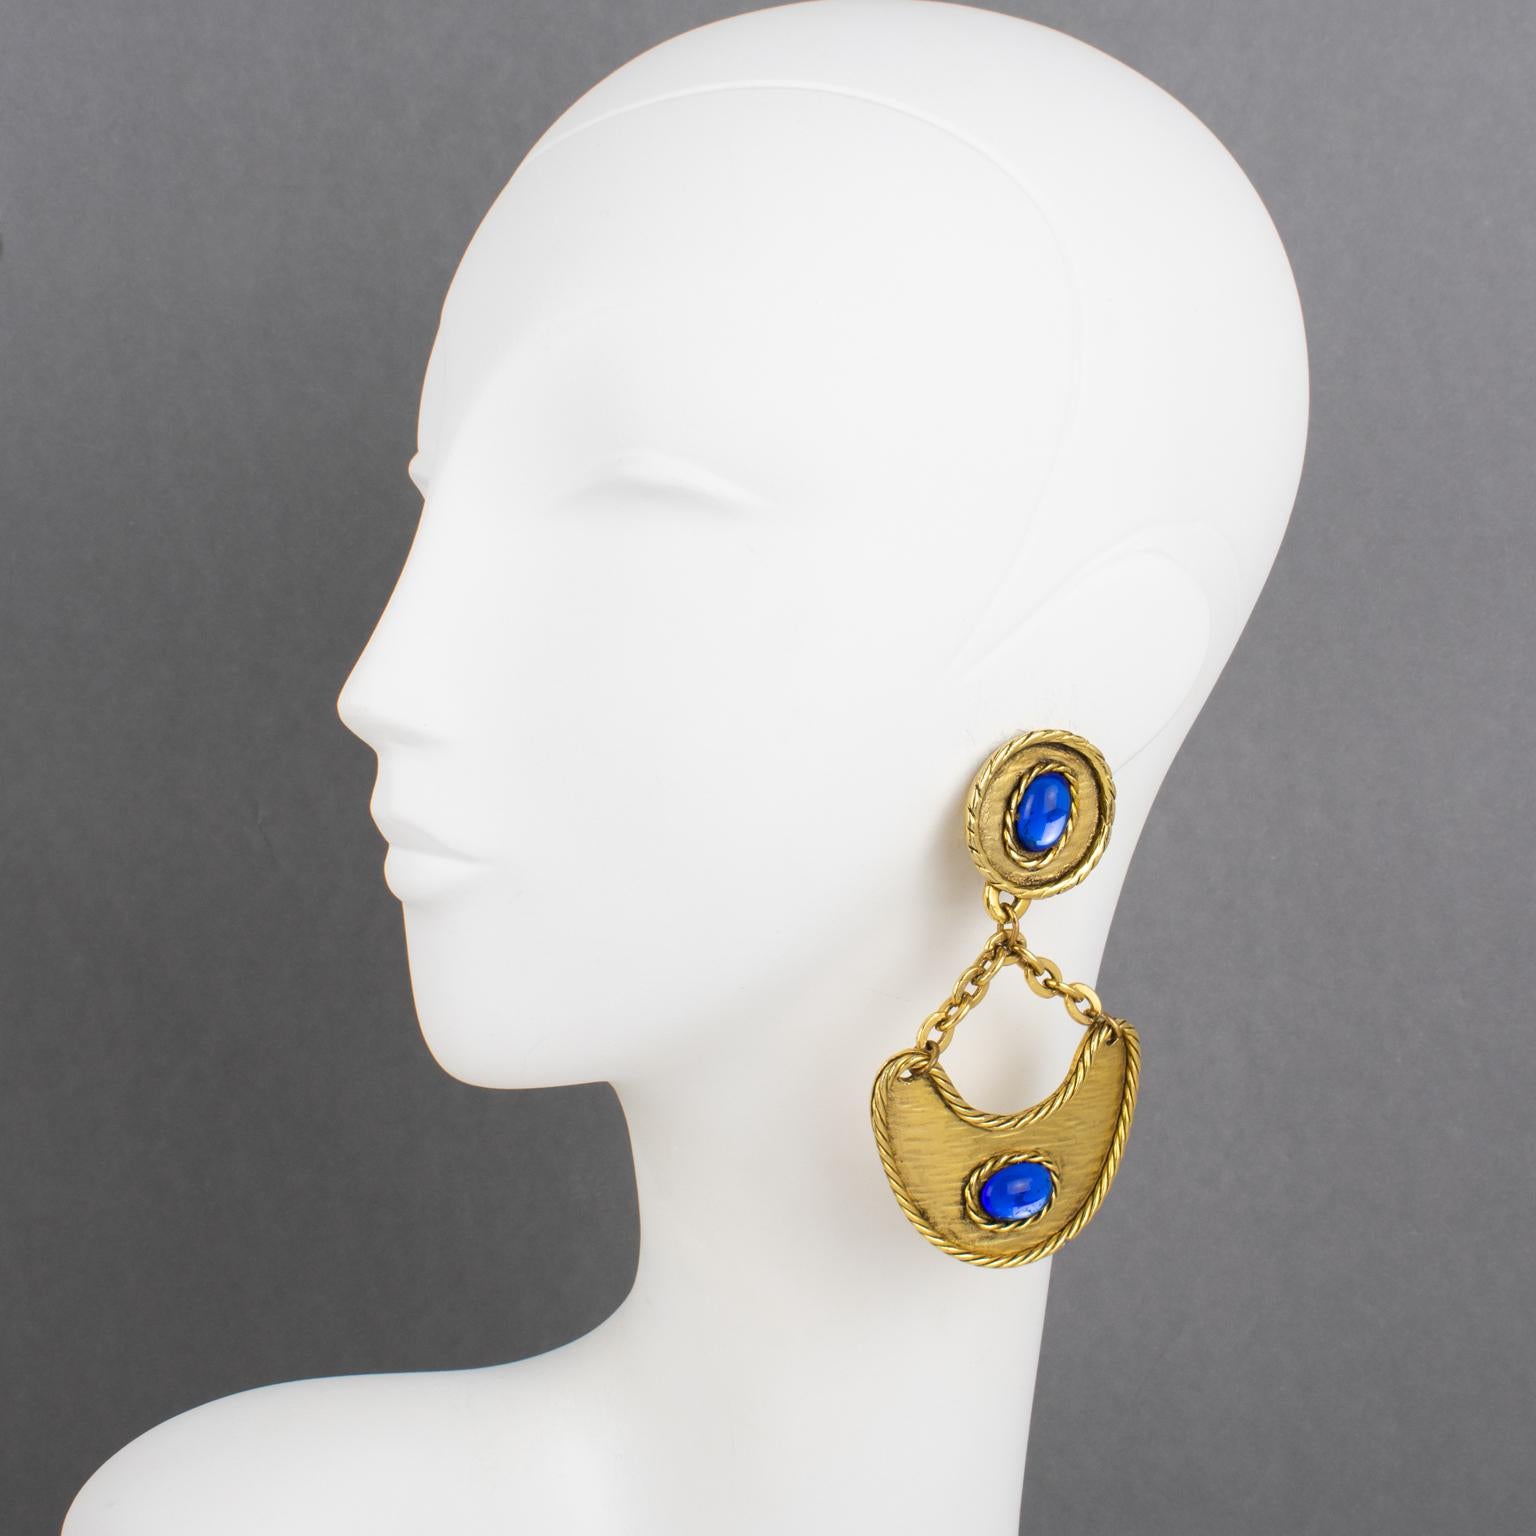 These Ultra-chic dangling clip-on earrings have a design reminiscent of Mercedes Robirosa's work. The earrings are a stunning example of baroque style, with a massive construction that captures attention. Its gilt metal frame adds a touch of